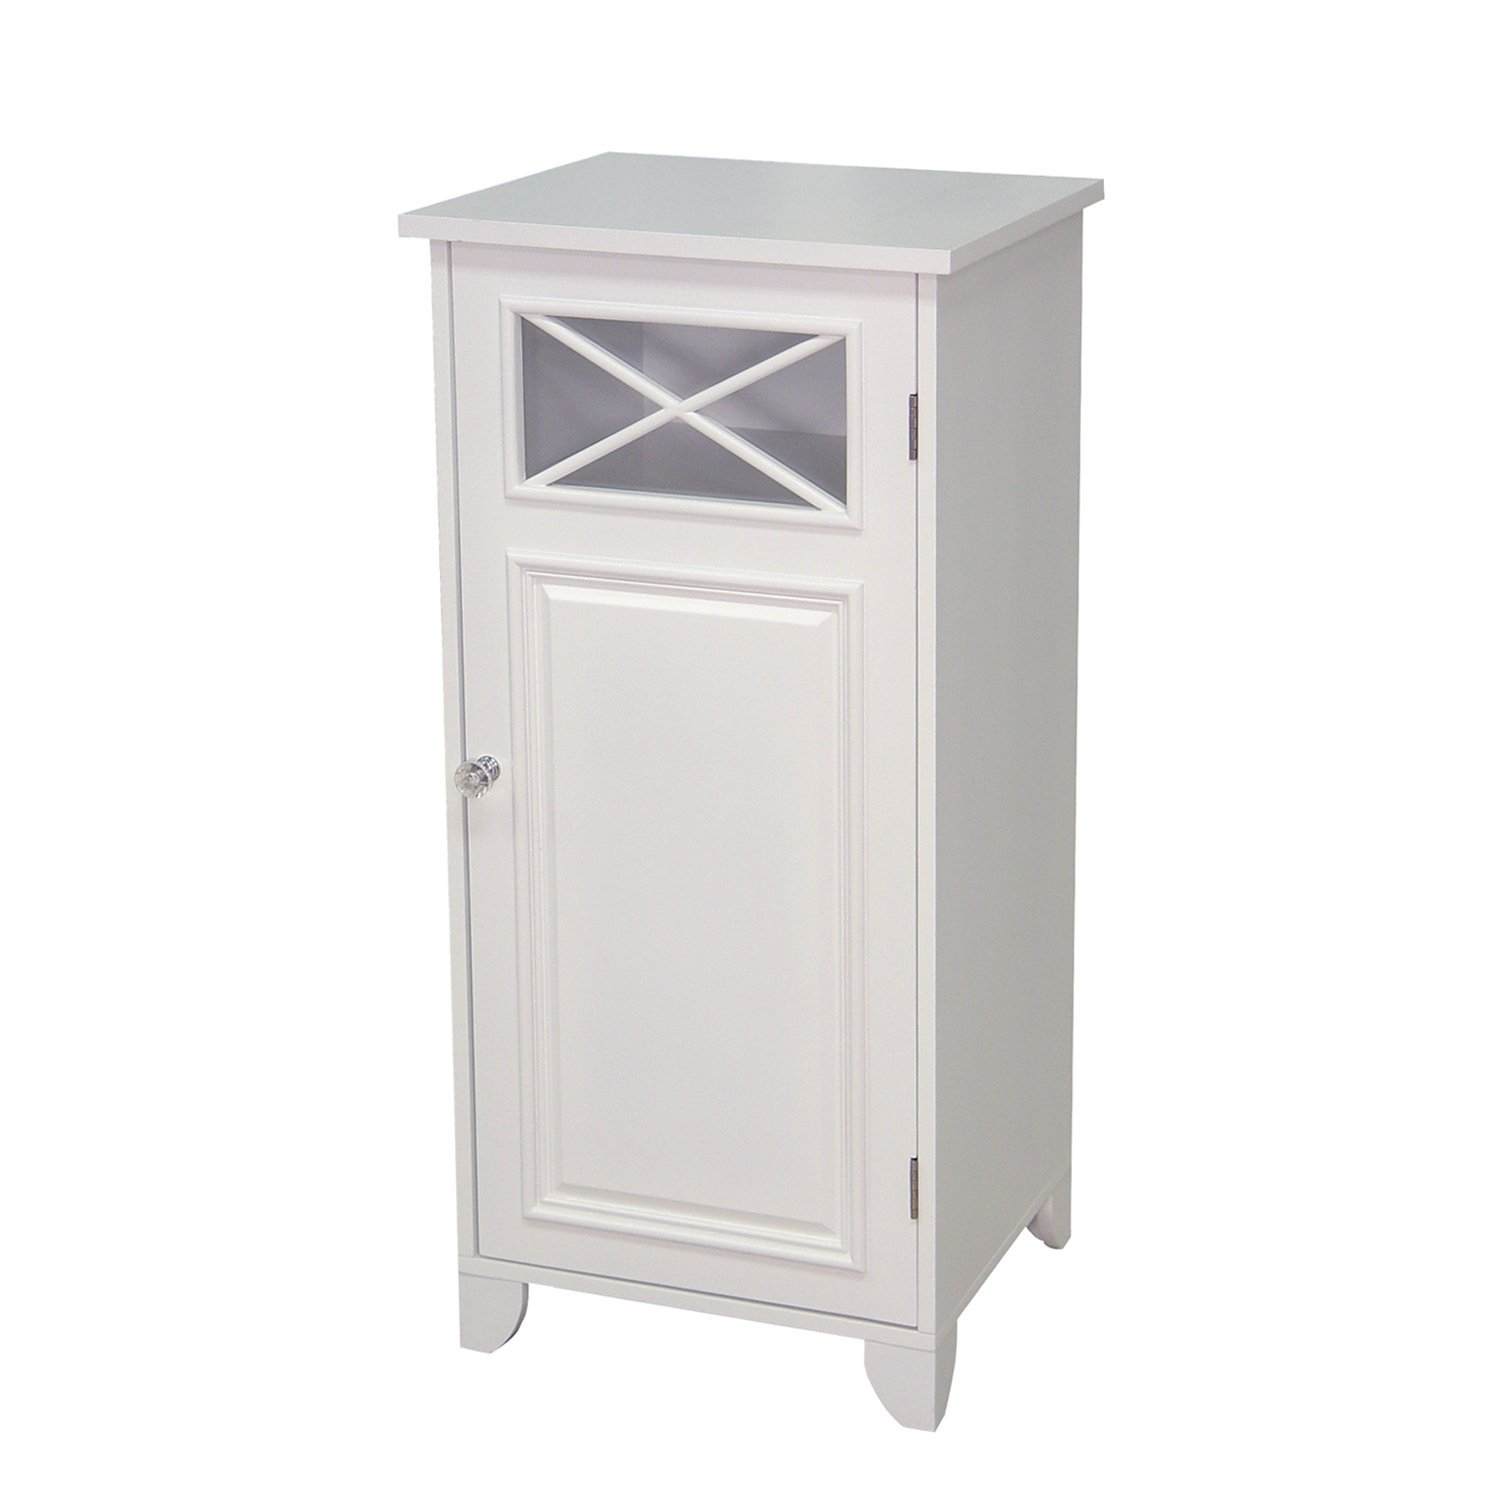 12 Awesome Bathroom Floor Cabinet With Doors Review with dimensions 1500 X 1500